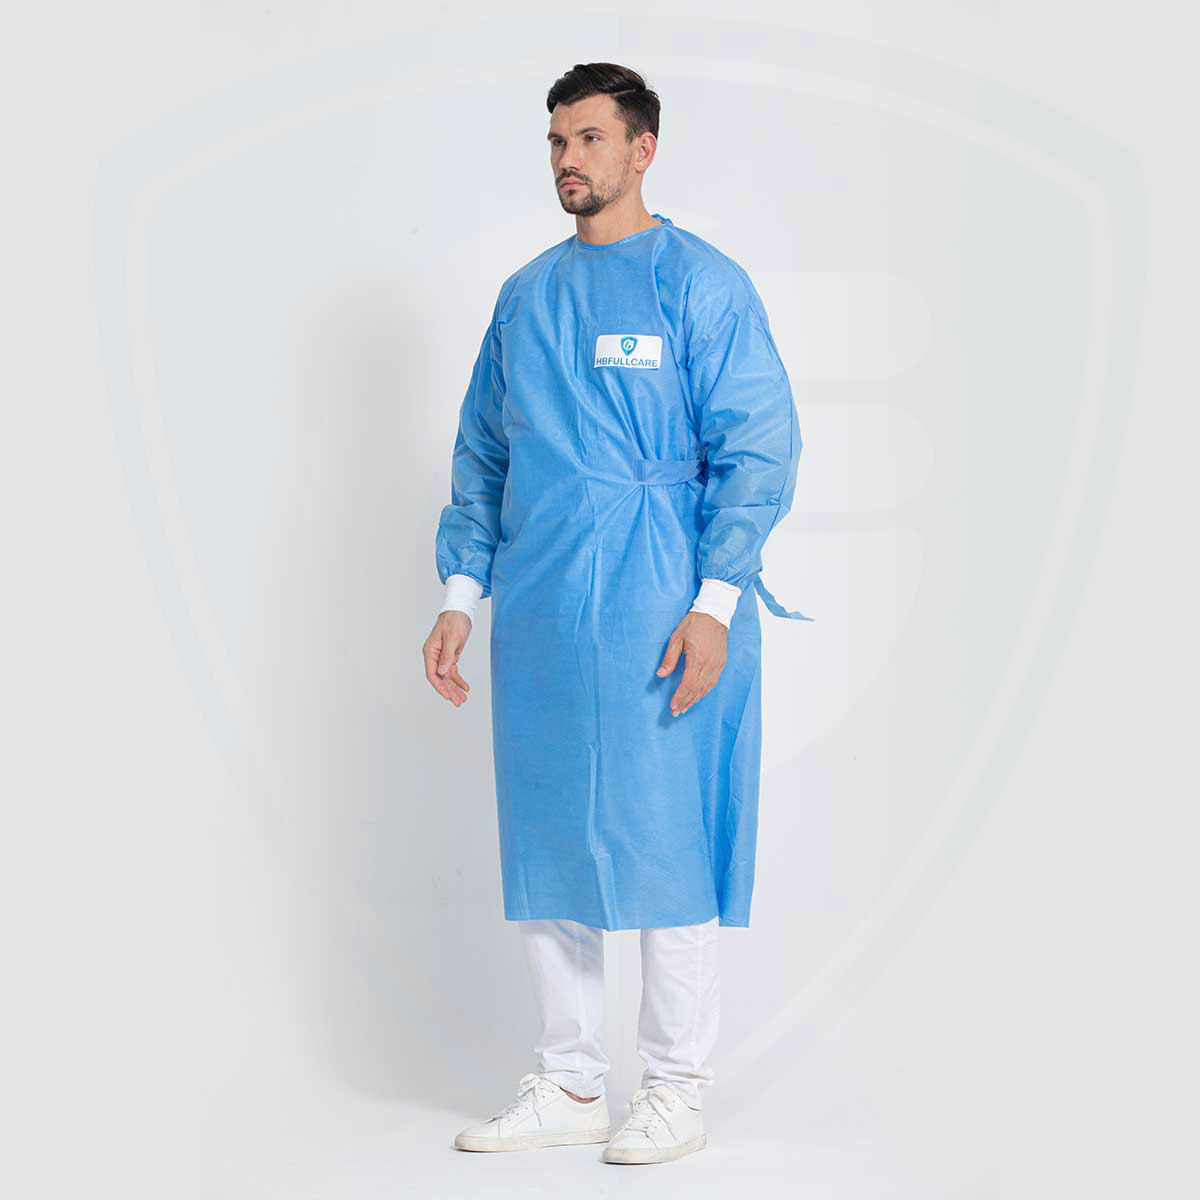 Blue Autoclavable Waterproof Disposable Surgical Gown for Hospital/clinics AAMI PB70 Level3